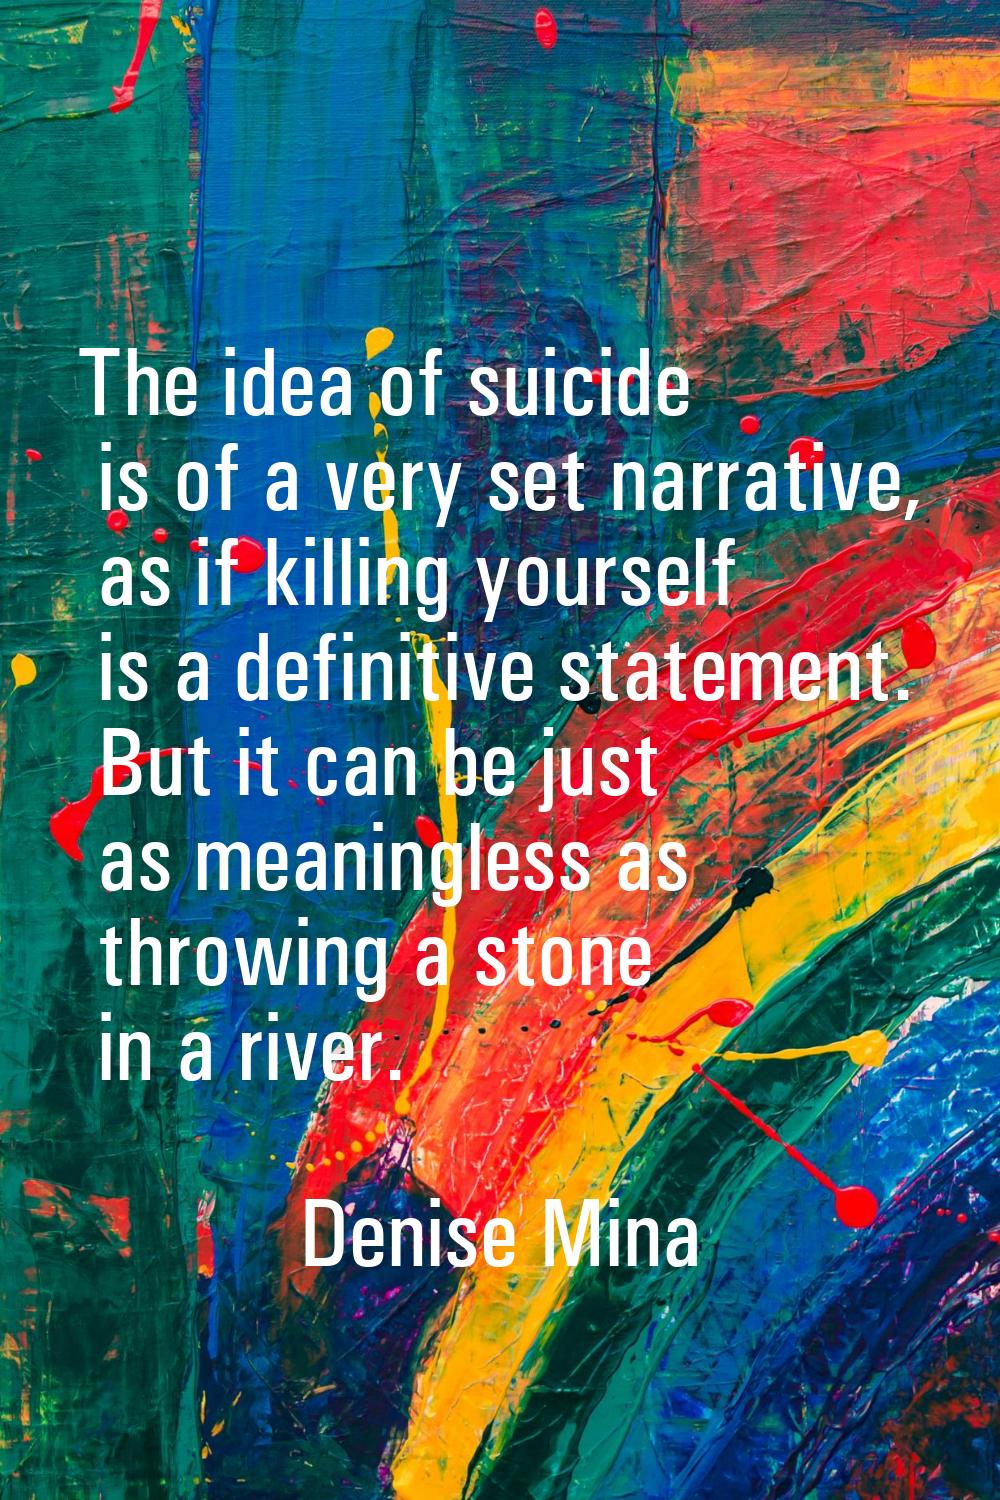 The idea of suicide is of a very set narrative, as if killing yourself is a definitive statement. B